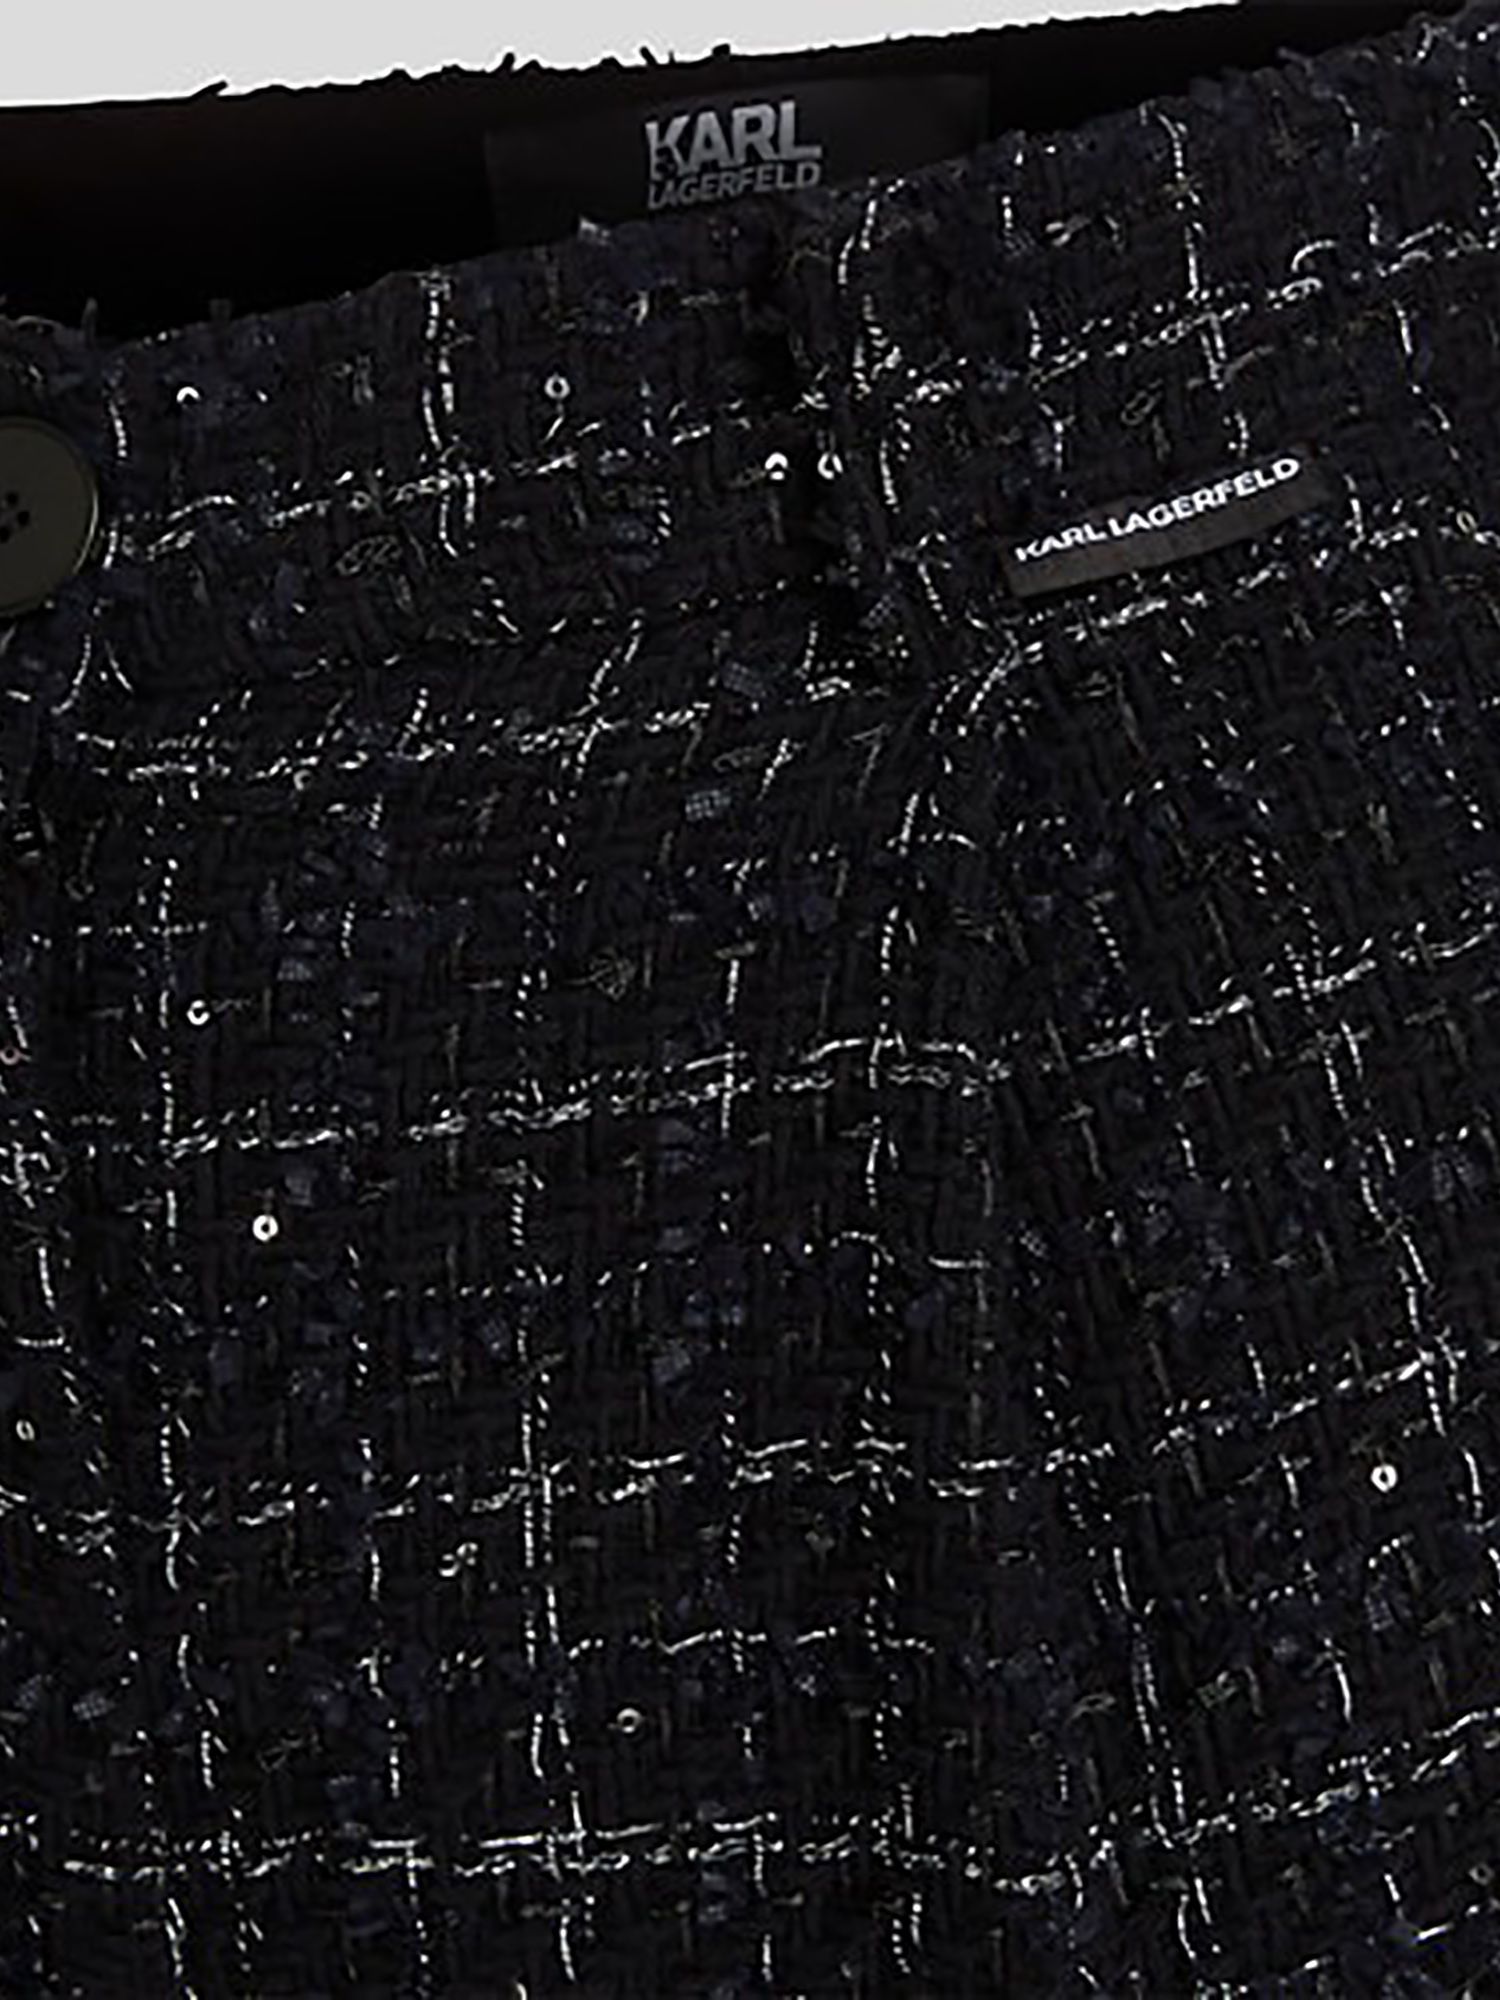 KARL LAGERFELD Check Boucle Trousers, Black/Silver, 6